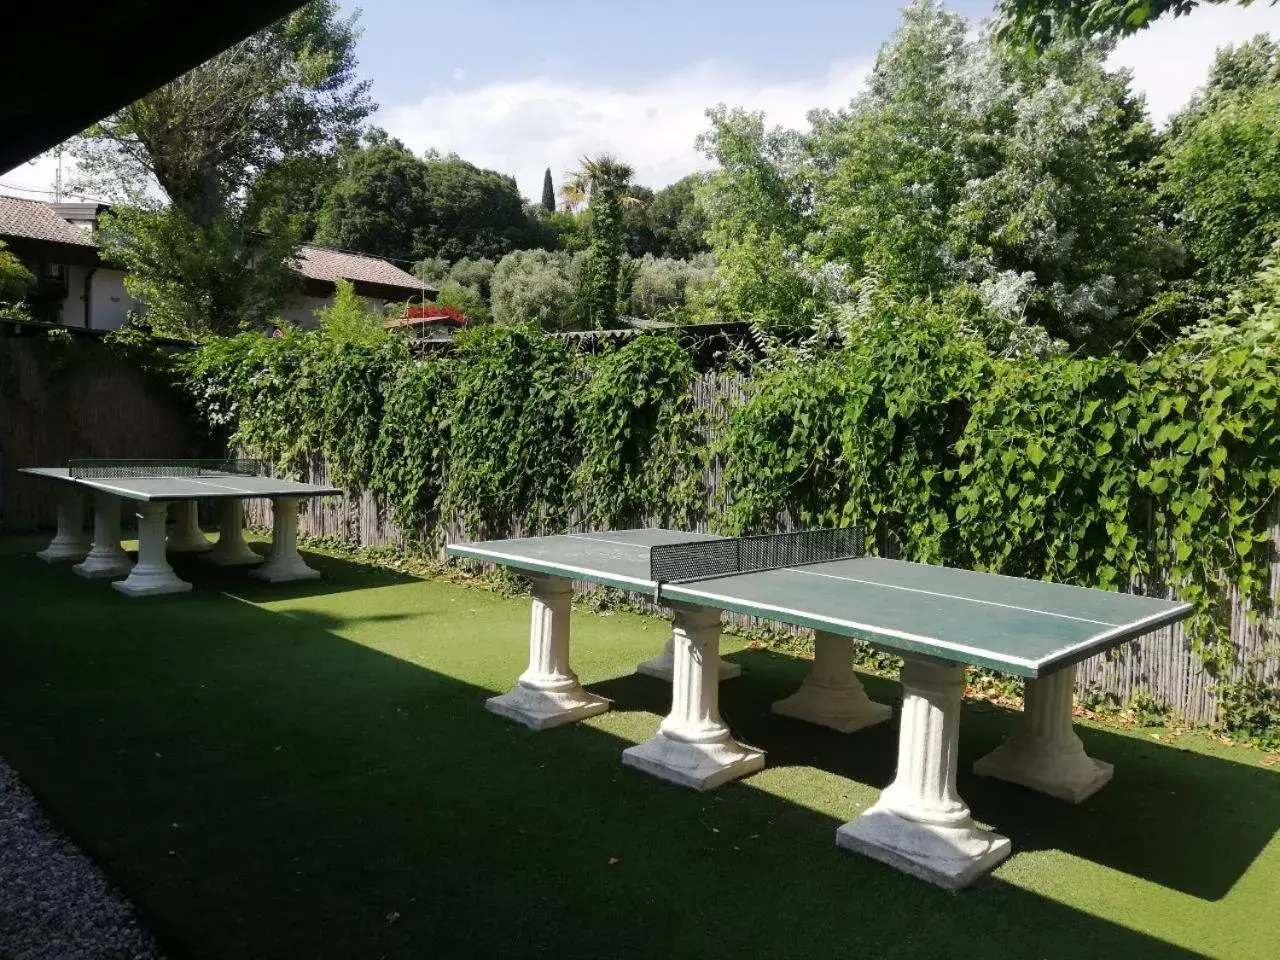 Table tennis in Residence Villalsole